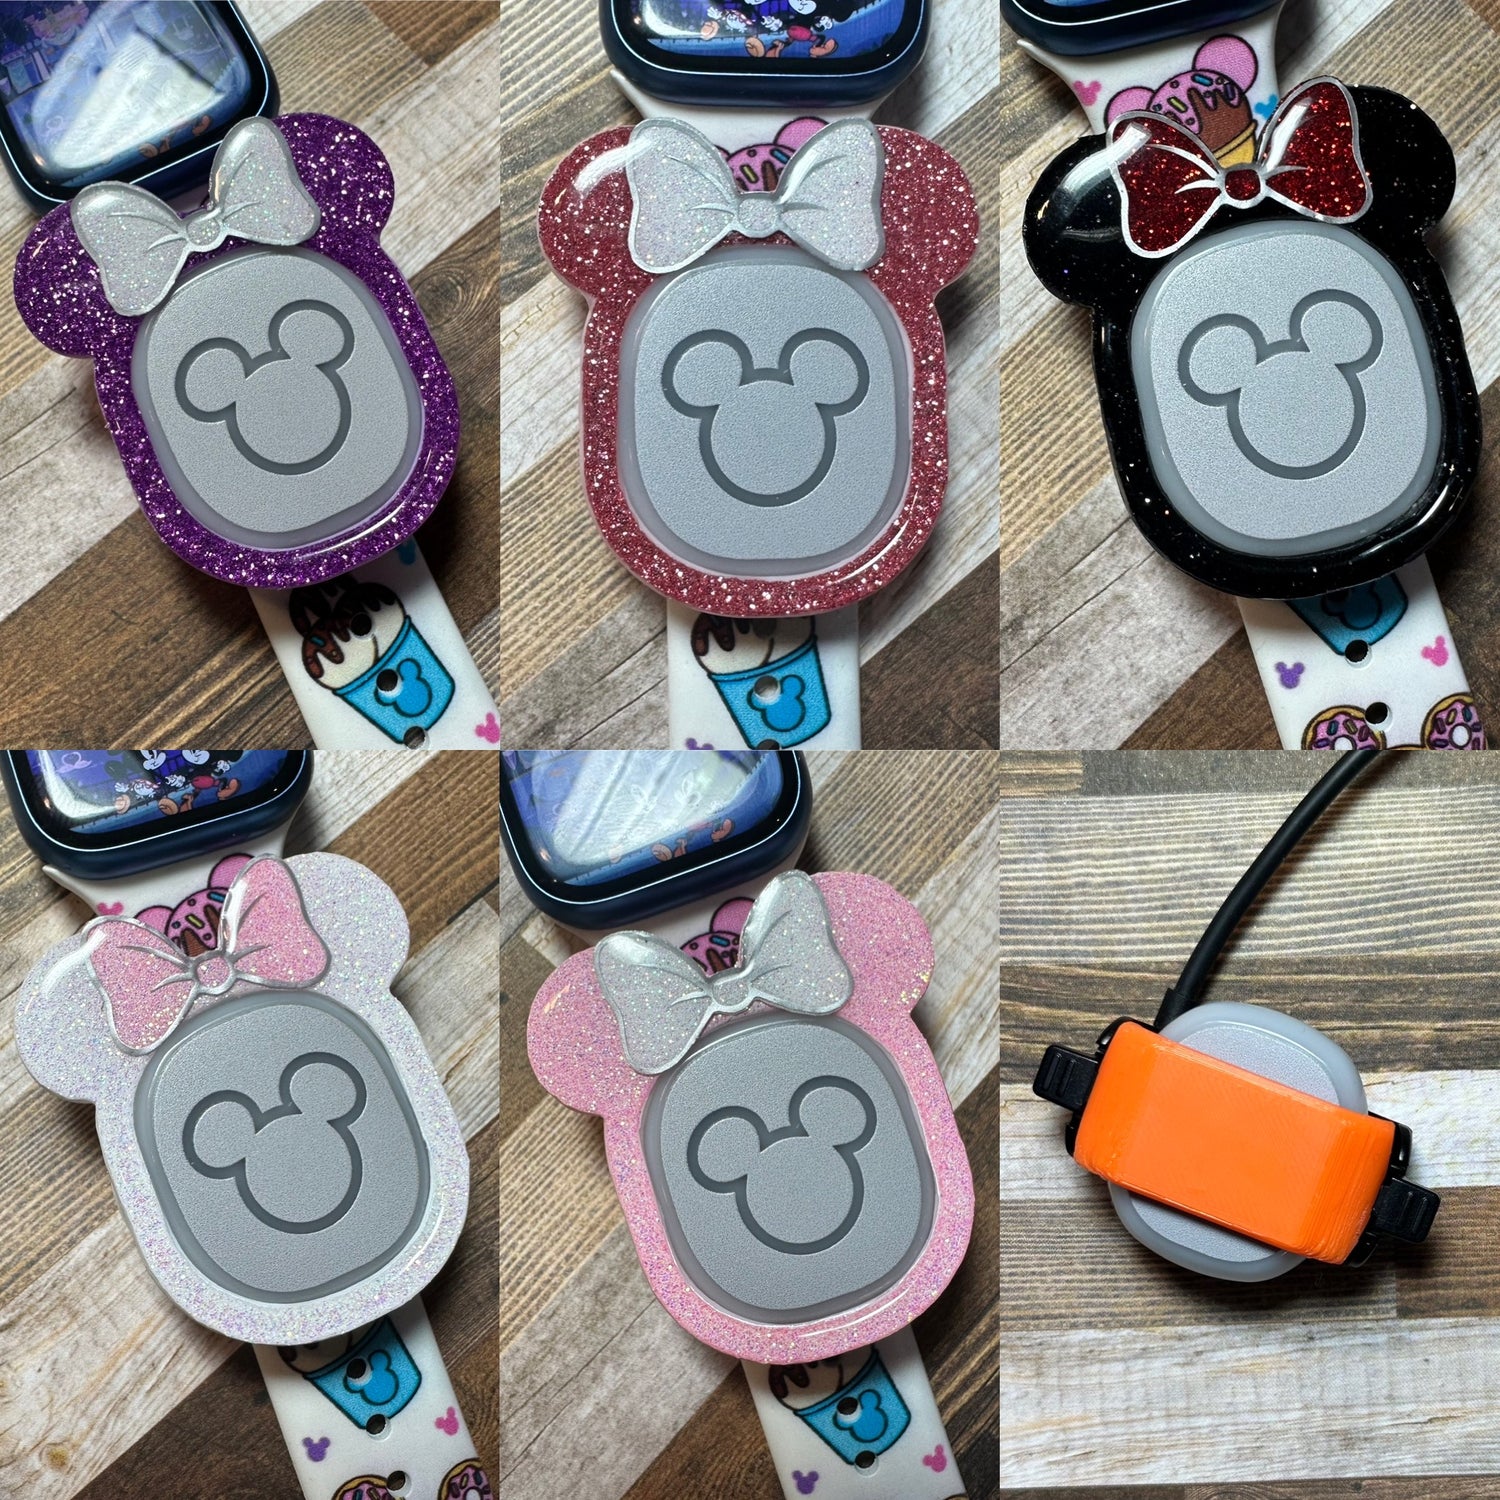 Magic Band Puck Holders for Watch Bands